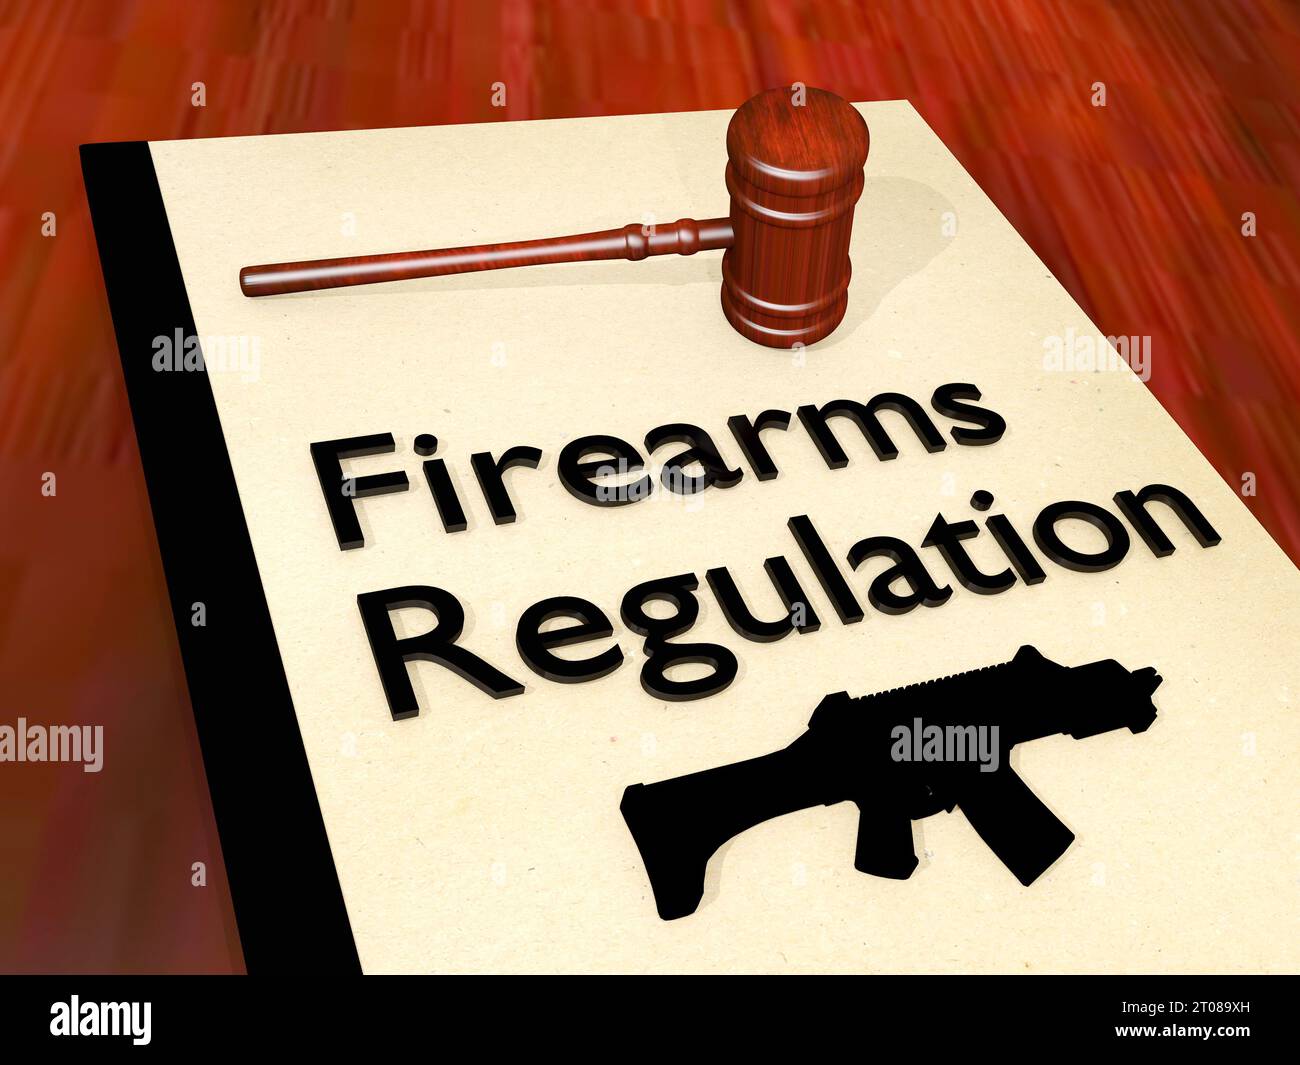 3D illustration of a judge gavel and Firearms Regulation title on legal booklet, along symbolic gun. Stock Photo